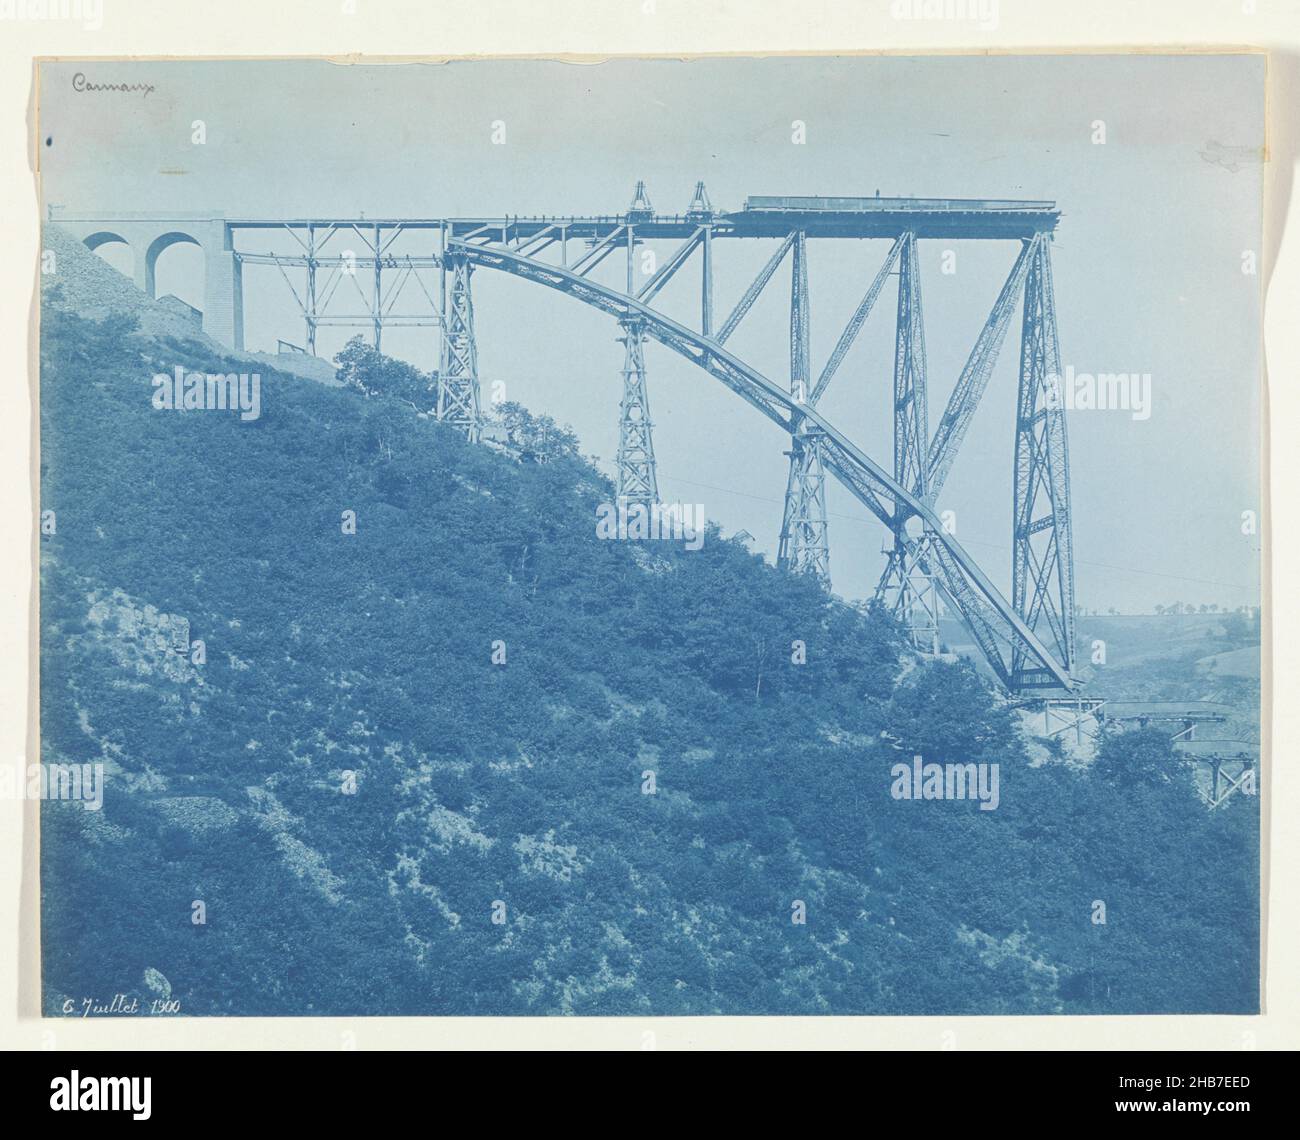 Construction of the Viaur Viaduct in France by the Societé de Construction des Battignolles, July 6, 1900, anonymous, France, 6-Jul-1900, photographic support, cyanotype, height 224 mm × width 285 mm Stock Photo